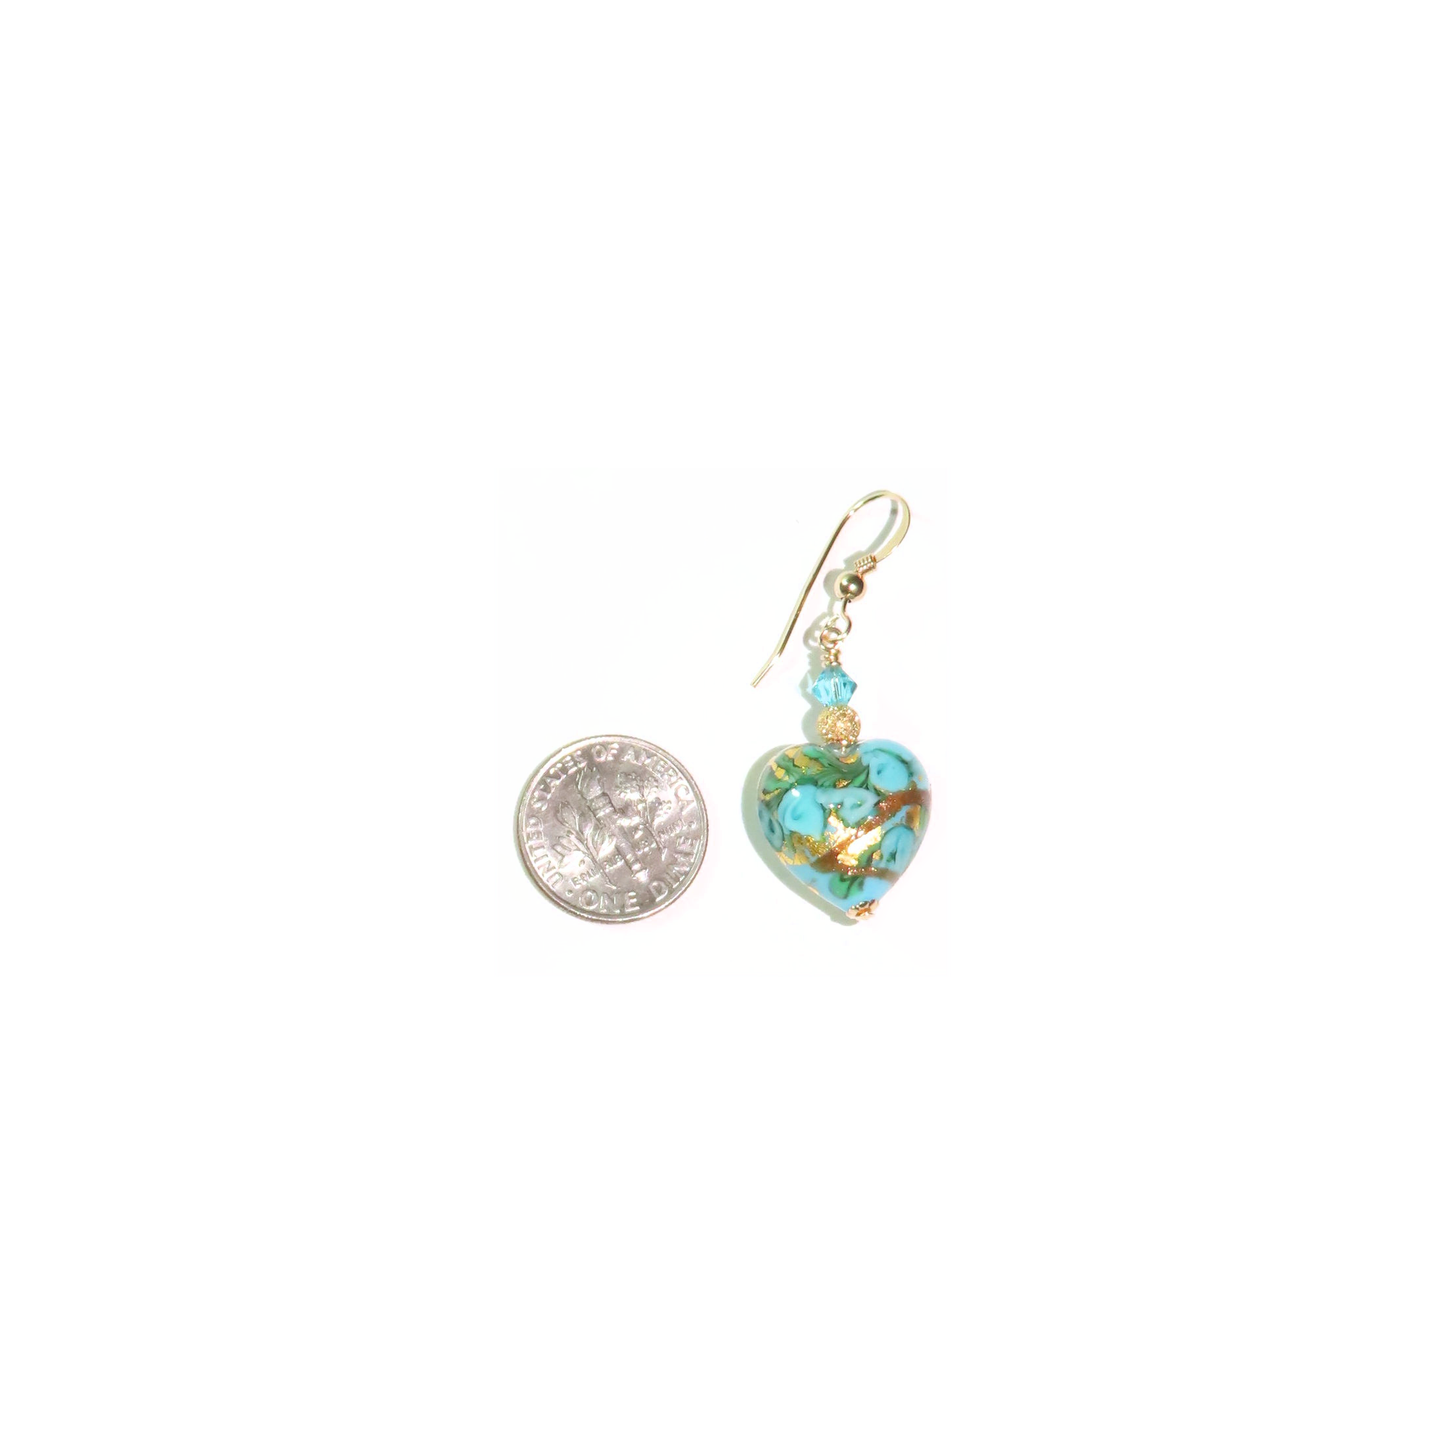 a pair of earrings with a coin on a white background